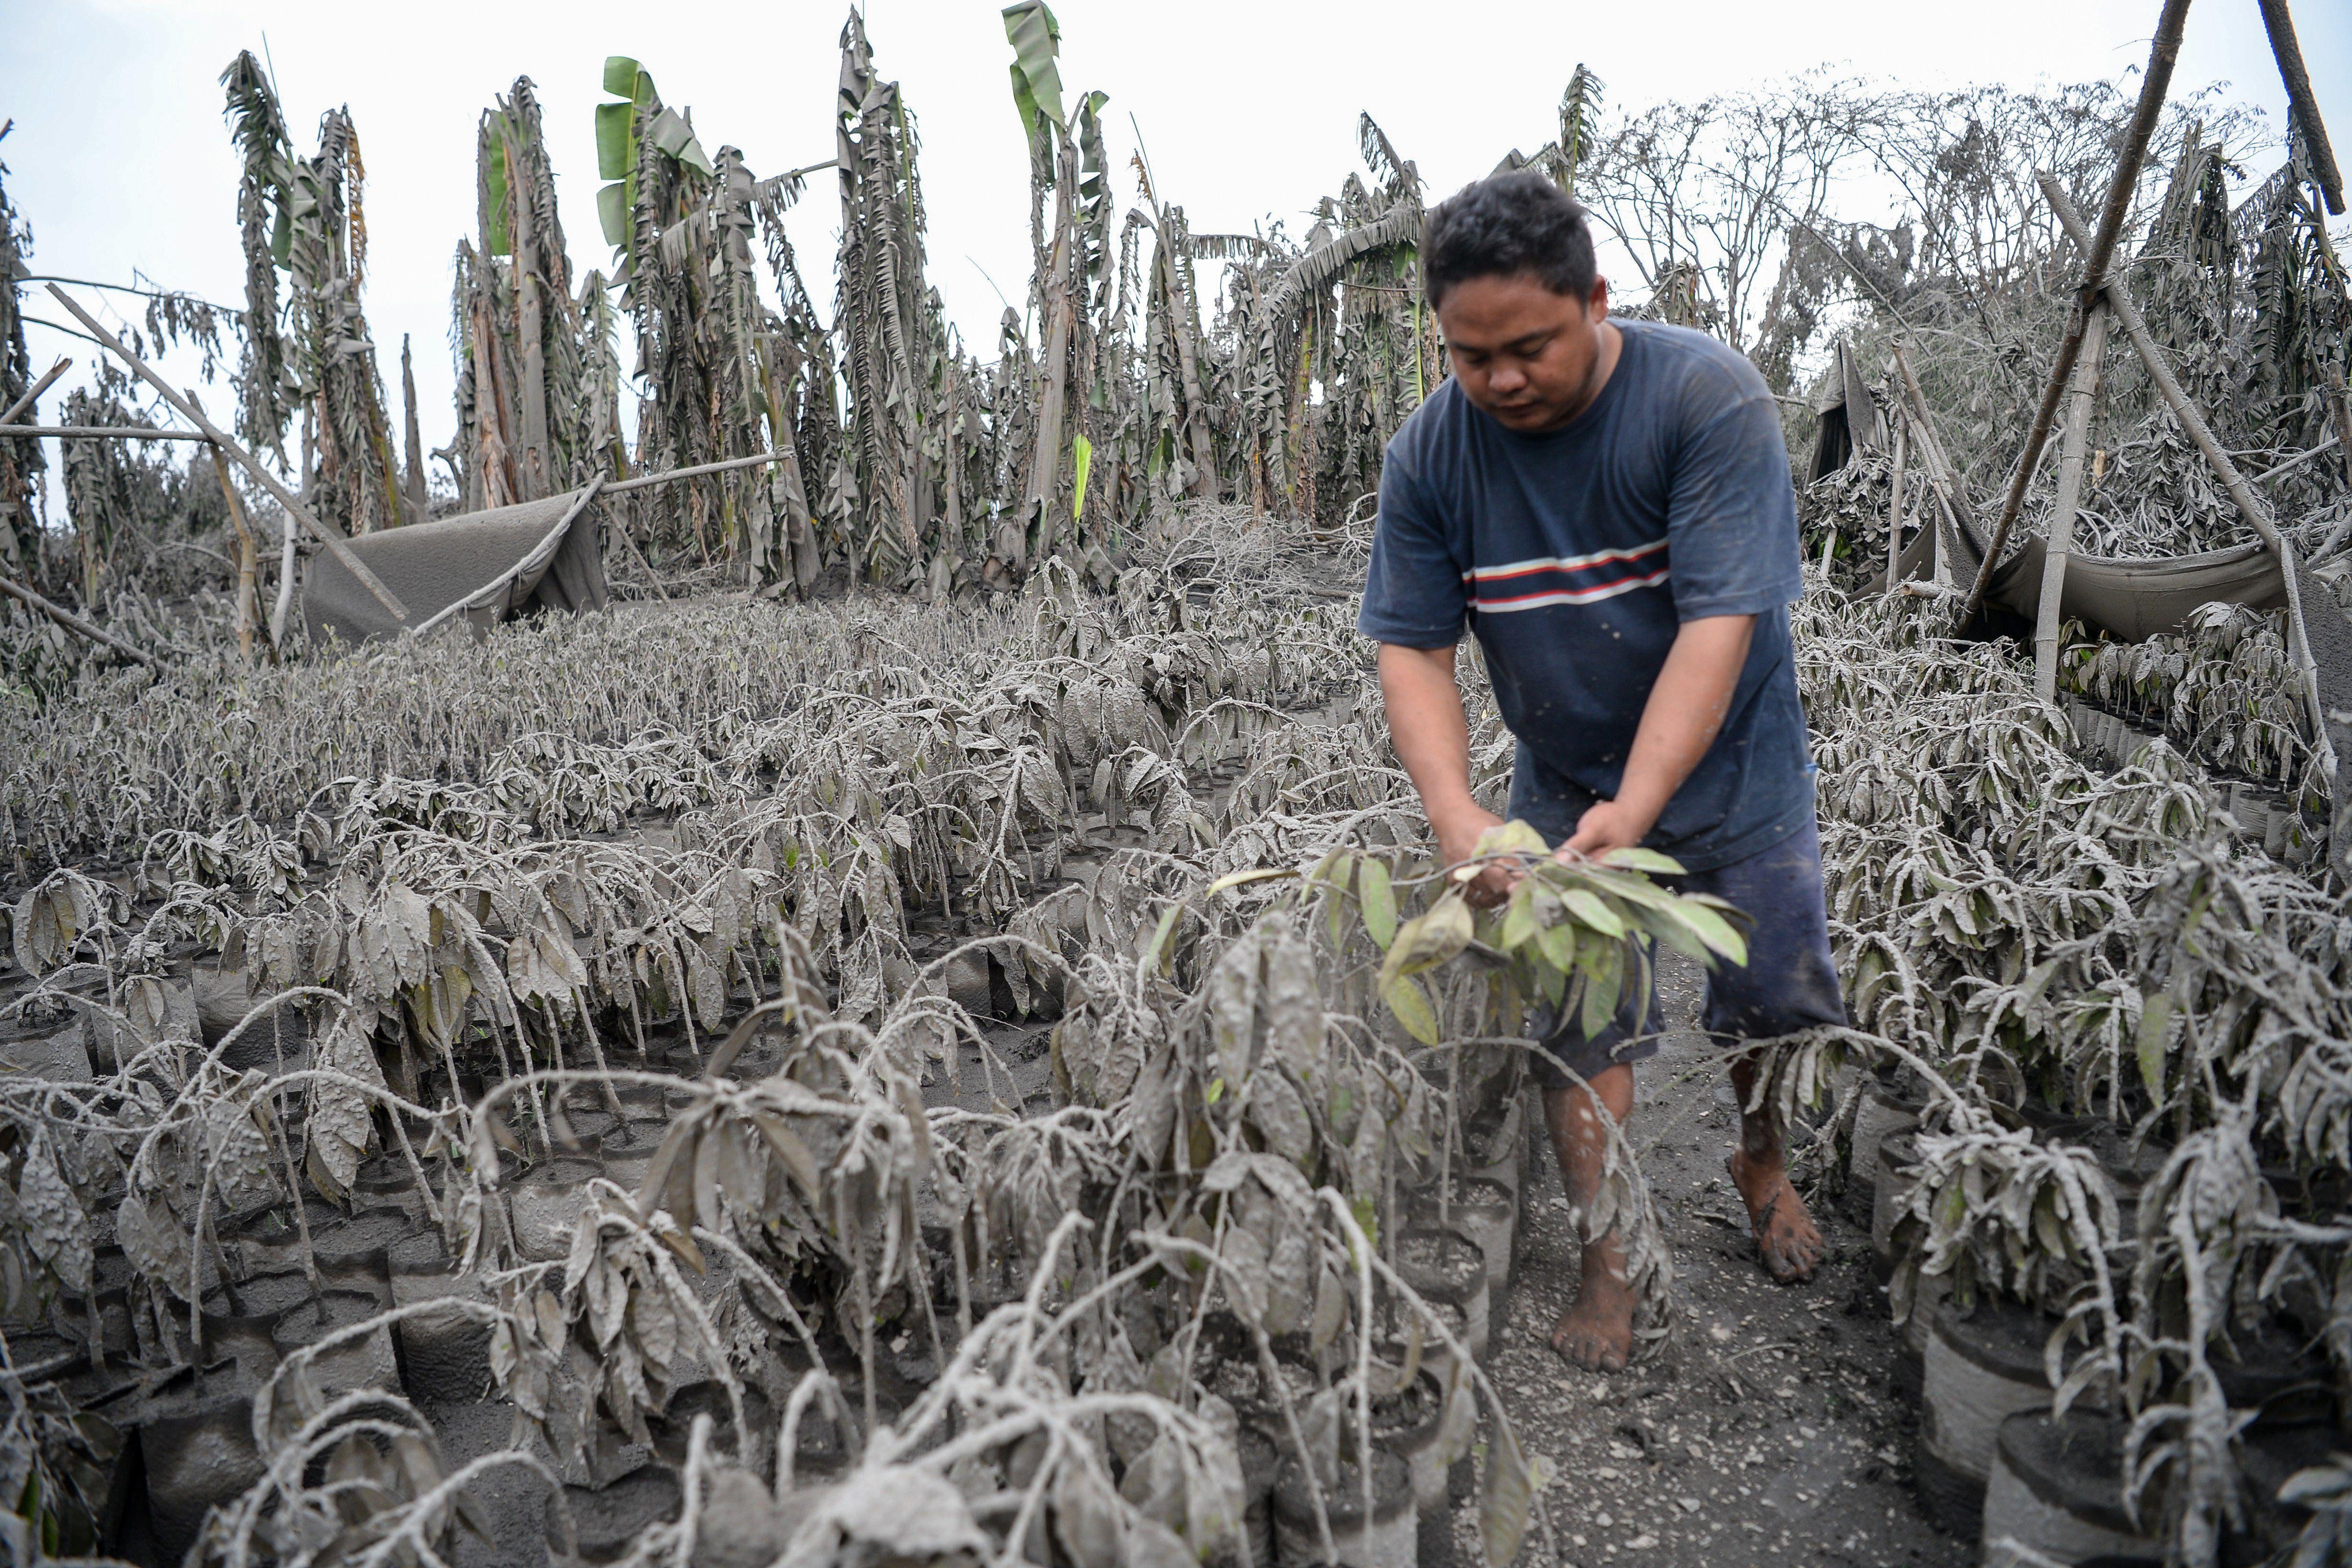 A field of plants covered in mud and ash. A barefoot man handles one of the plants, which has been dusted off.